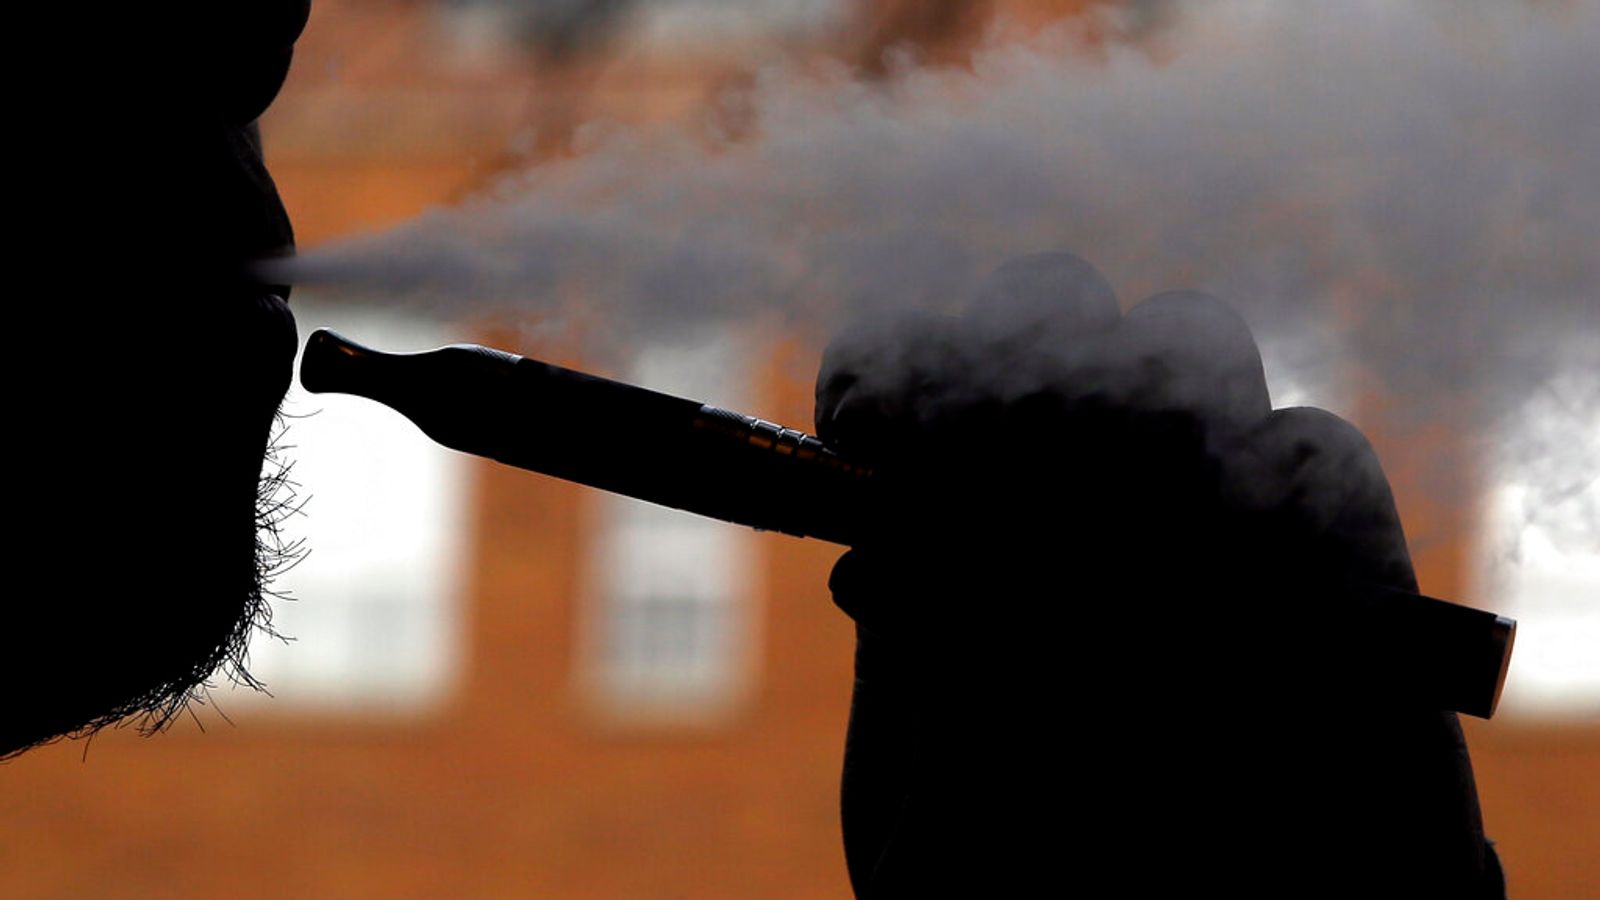 Crackdown needed to stop children buying vapes, experts warn | Science & Tech News